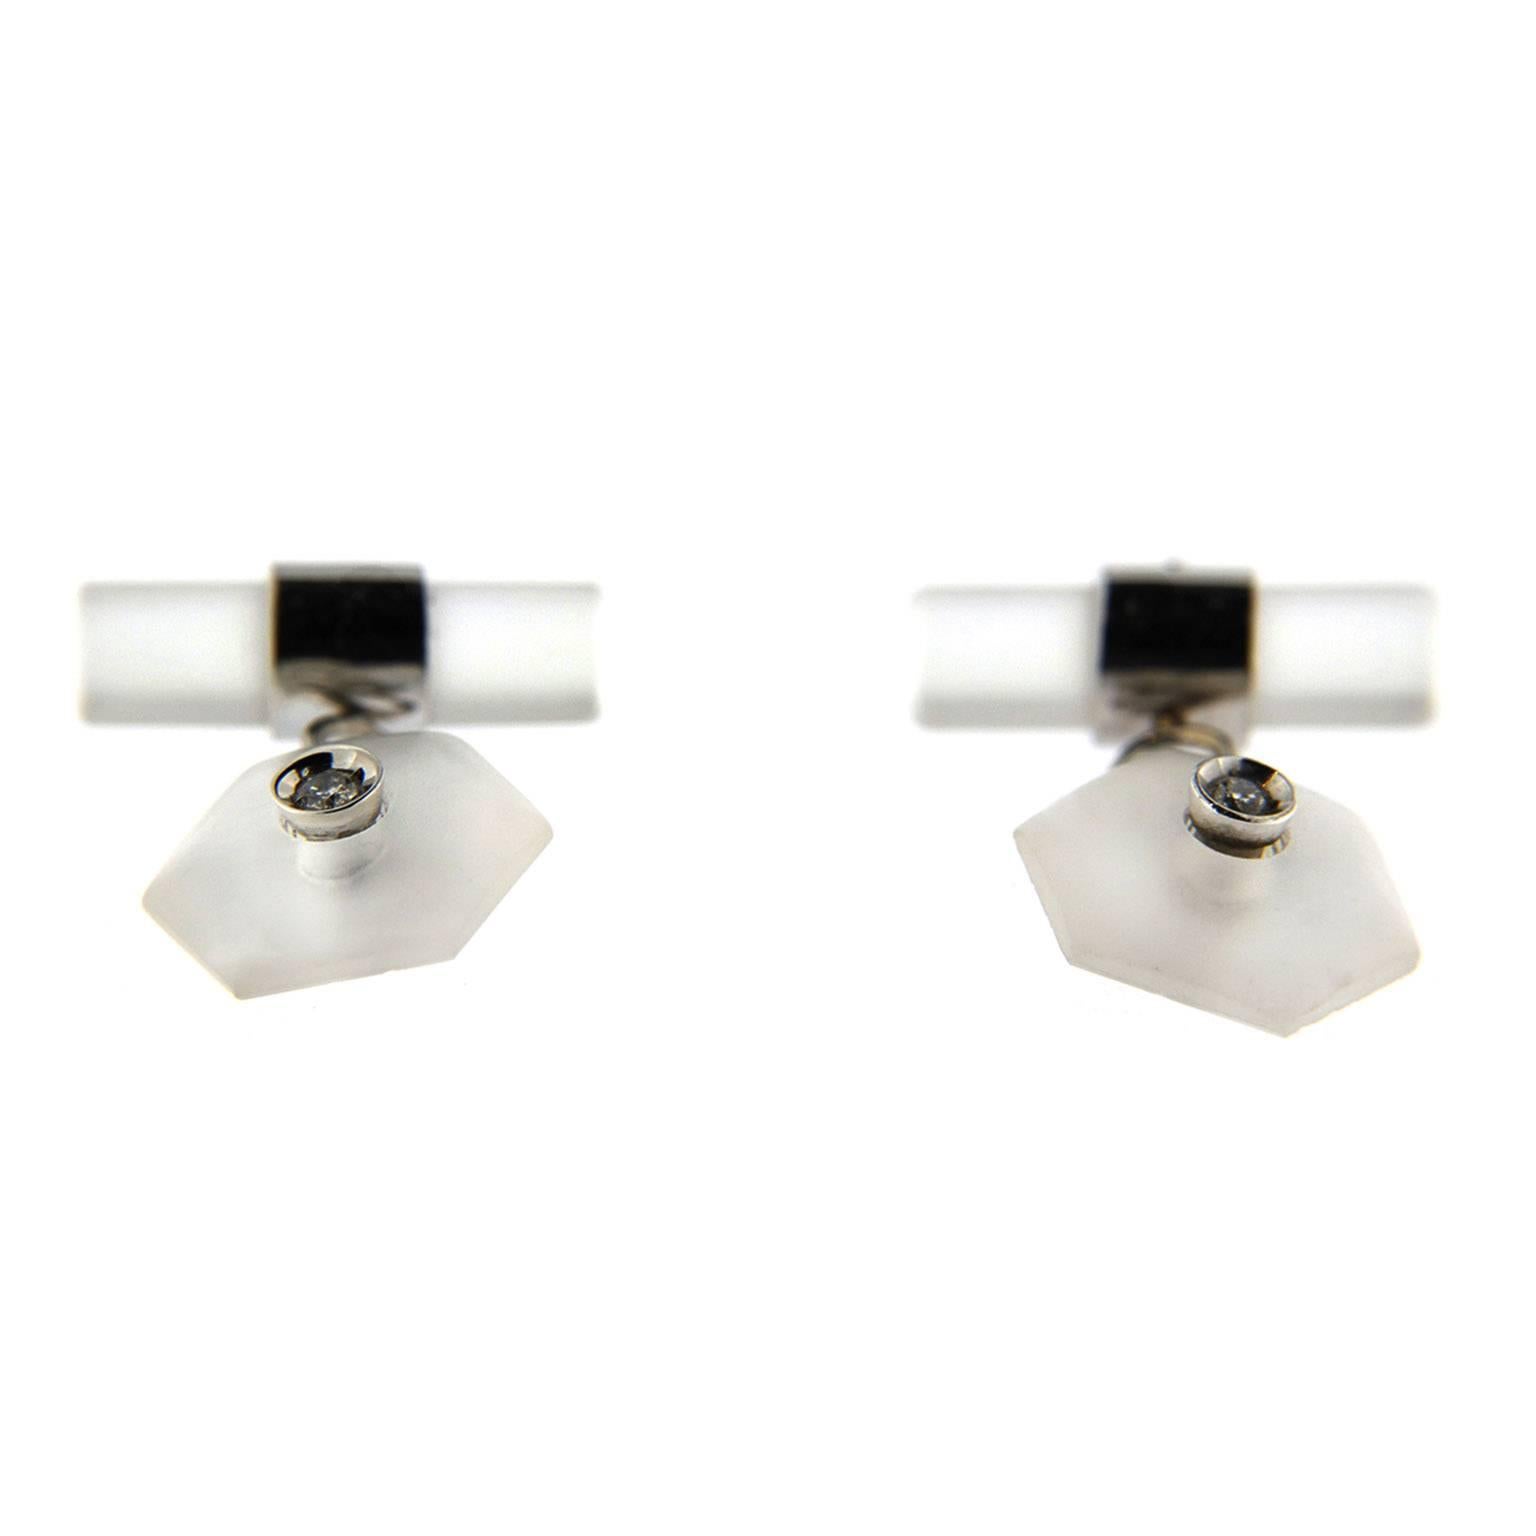 Jona design collection, hand crafted in Italy, 18 Karat white gold rock crystal cufflinks. The hexagons are set with two white diamonds weighing 0.8 ct. Dimensions: 0.47 in. H x 0.54 in. W x 0.15 in. D - 11 mm. H x 13 mm. w x 3 mm. D
All Jona